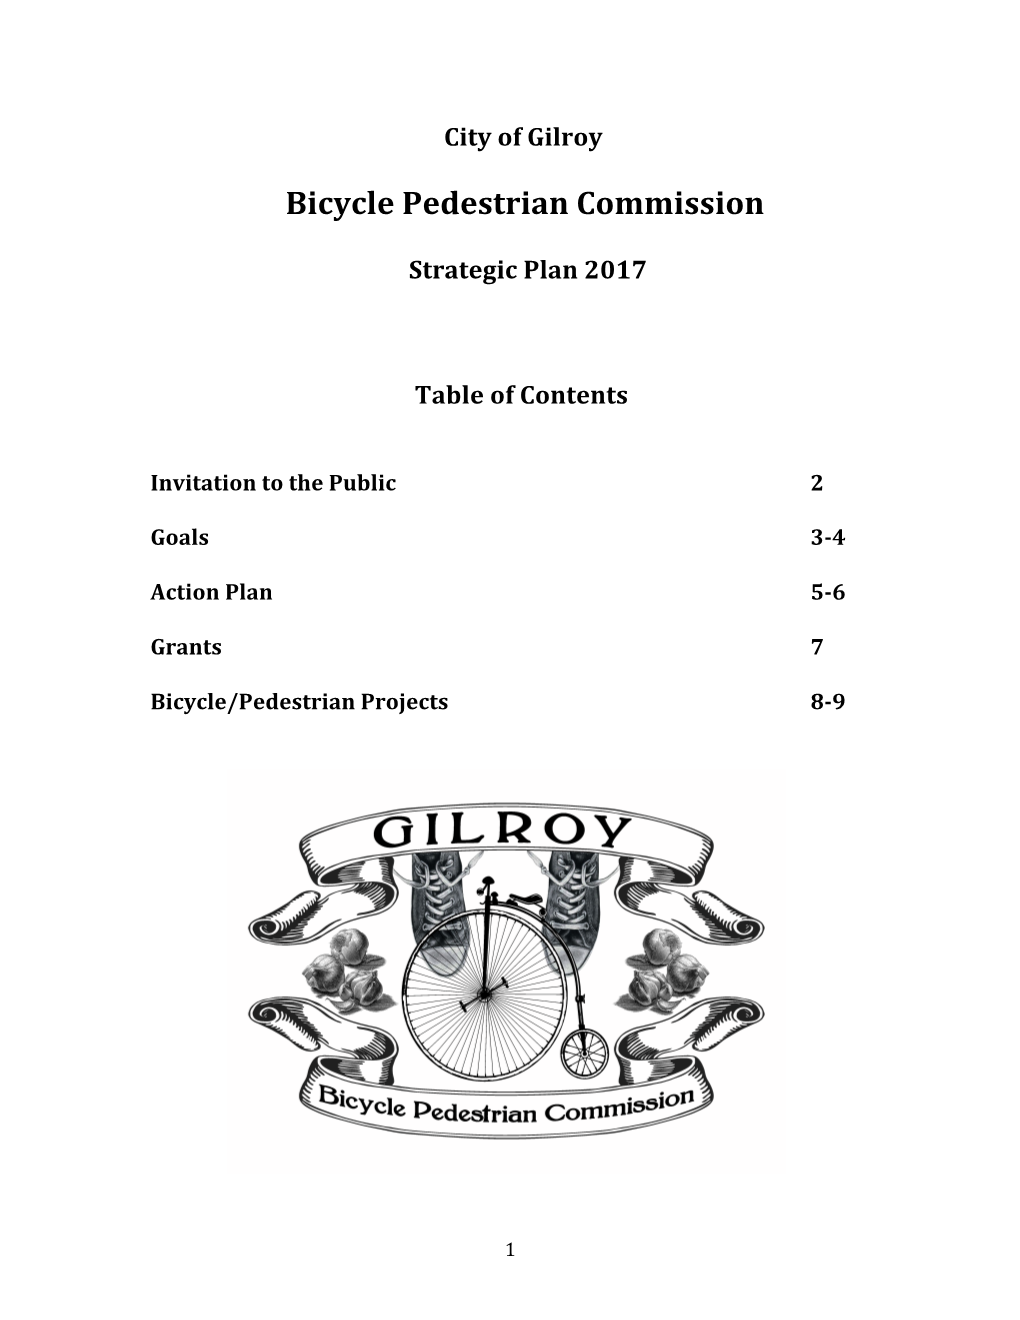 City of Gilroy Bicycle Pedestrian Commission Strategic Plan 2017